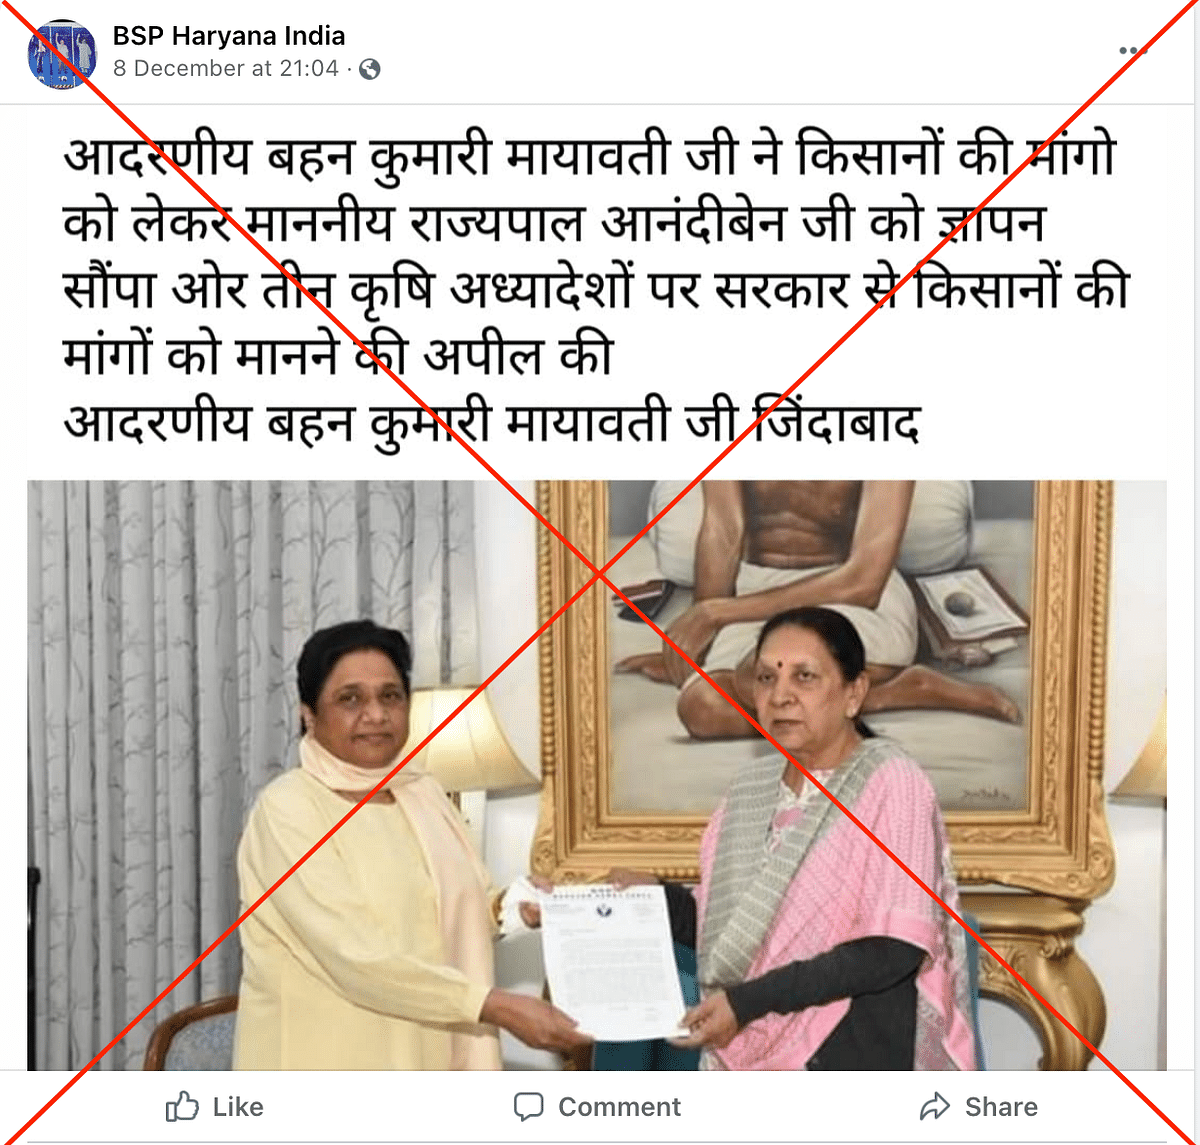 The image is from 2019 when the BSP chief met Patel and urged her to tackle the issue of rising crime against women.